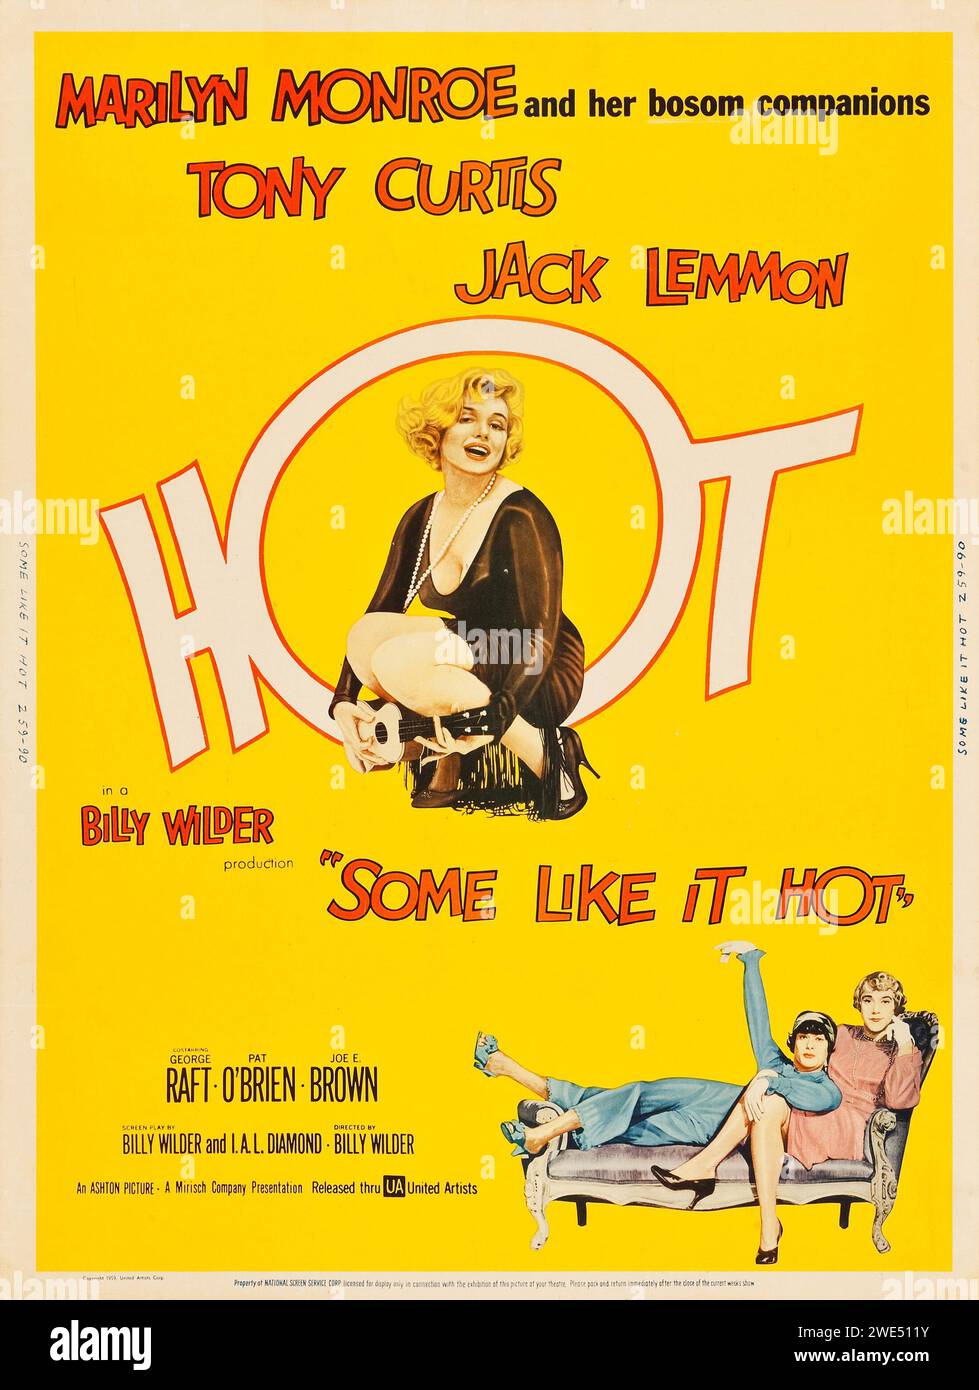 Some Like It Hot (United Artists, 1959). Old film poster - Style Z - Marilyn Monroe, Tony Curtis, Jack Lemmon. Stock Photo